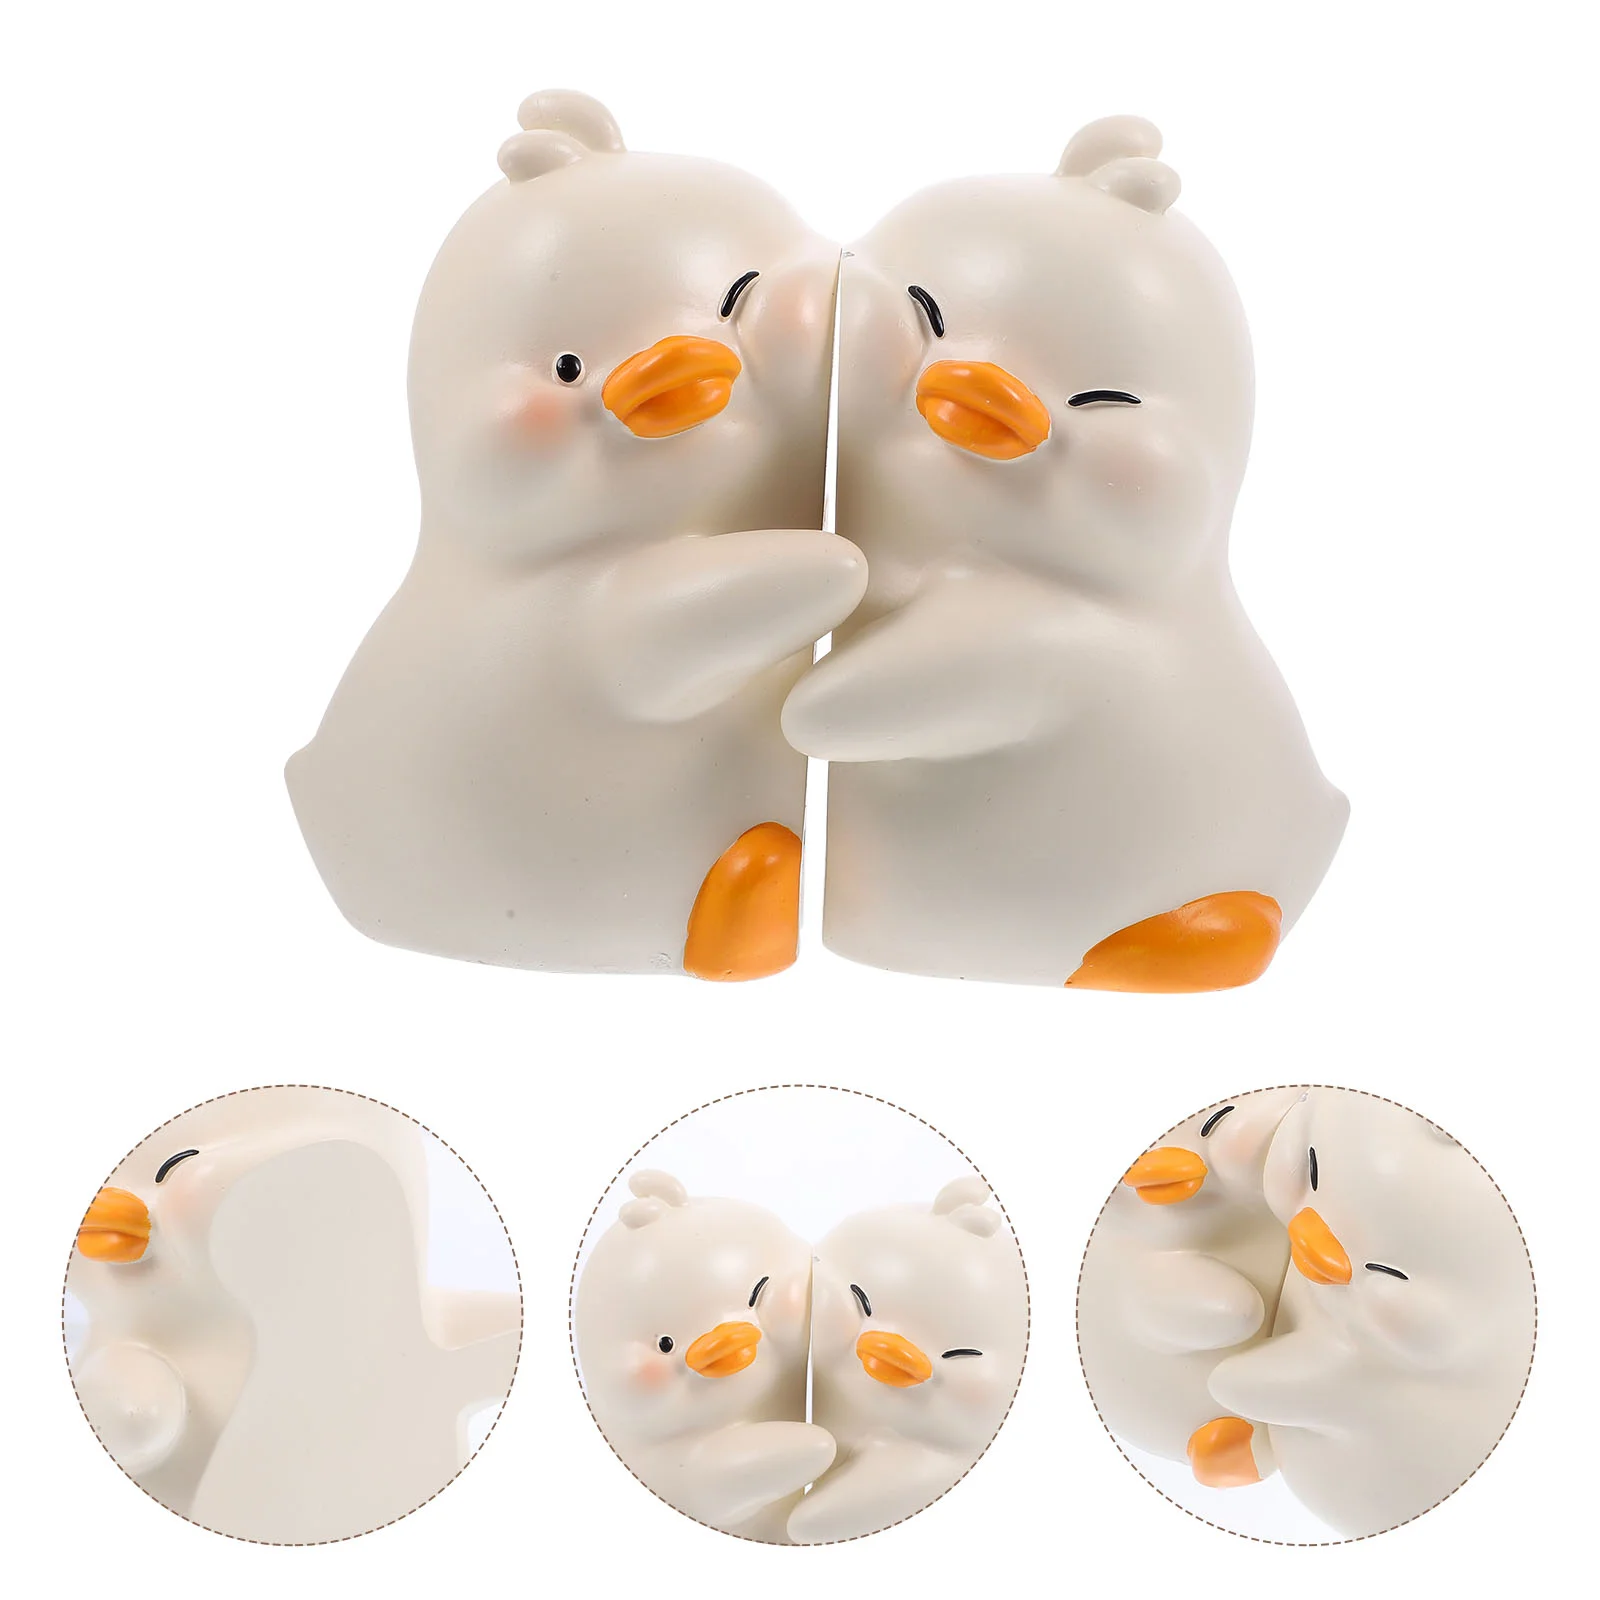 1 Pair Cute Hug Ducks Decorative Bookend Resin Book Holder Stopper for Home Office Desk 1 pair cute hug ducks decorative bookend resin book holder stopper for home office desk